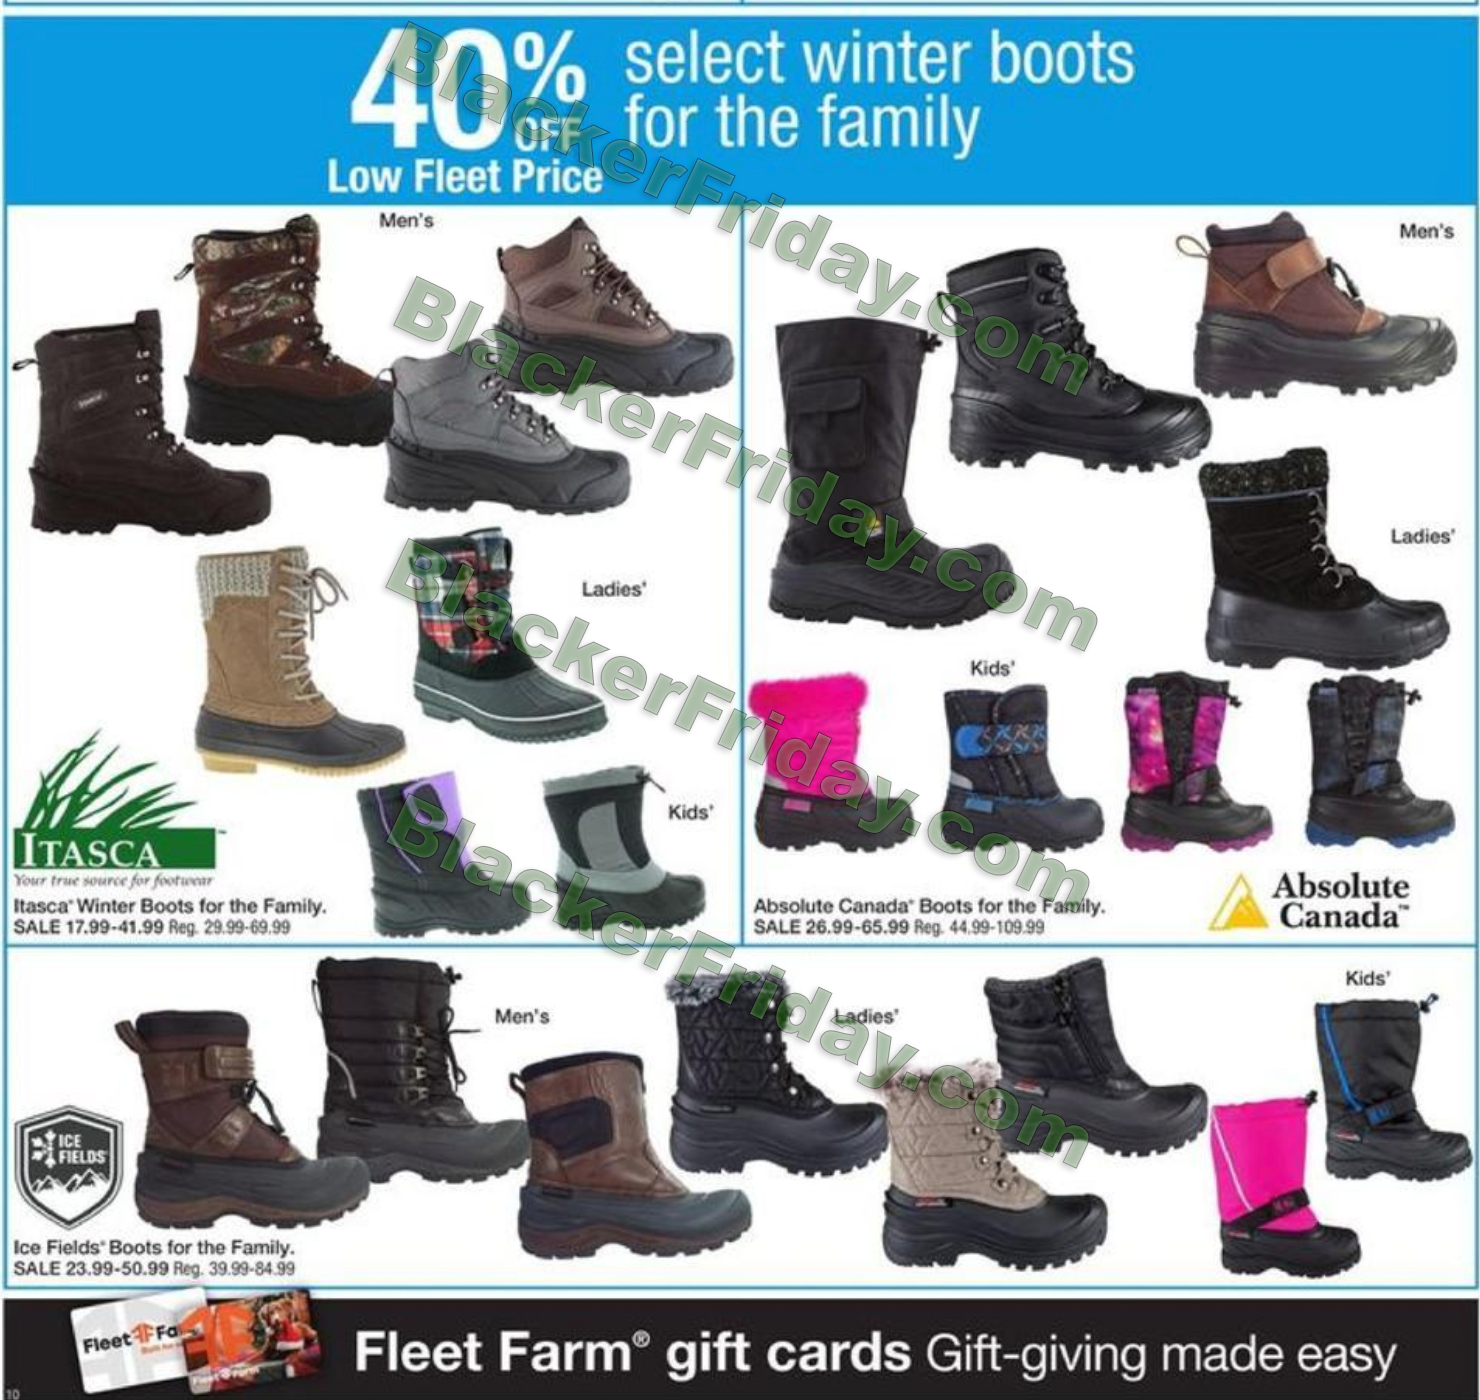 Buy > farm and fleet winter boots > in stock